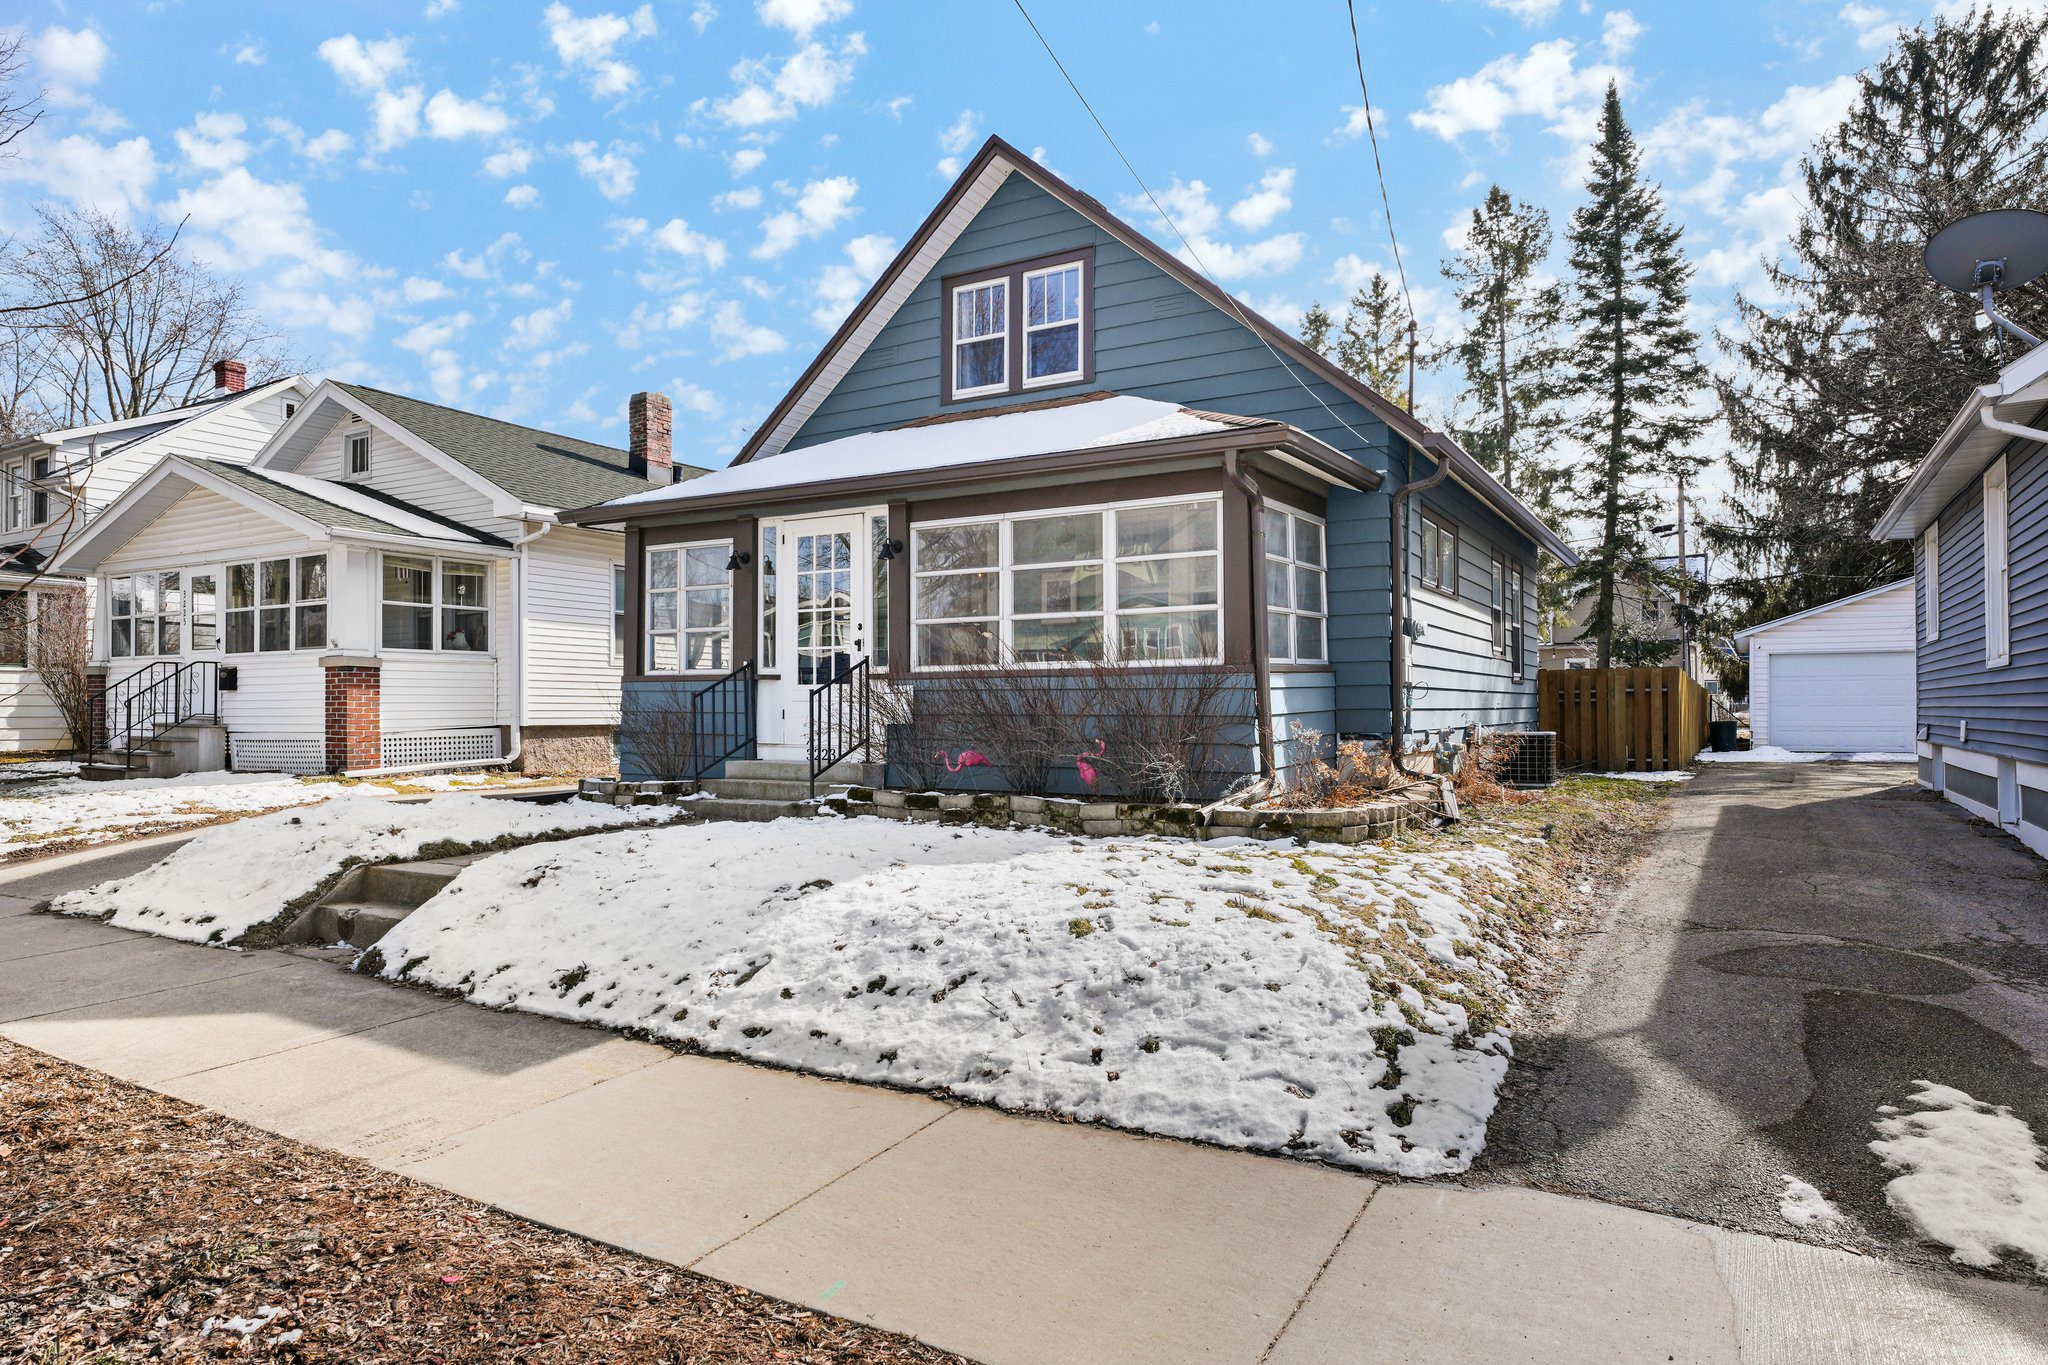 3-web-or-mls-3223-thorp-st